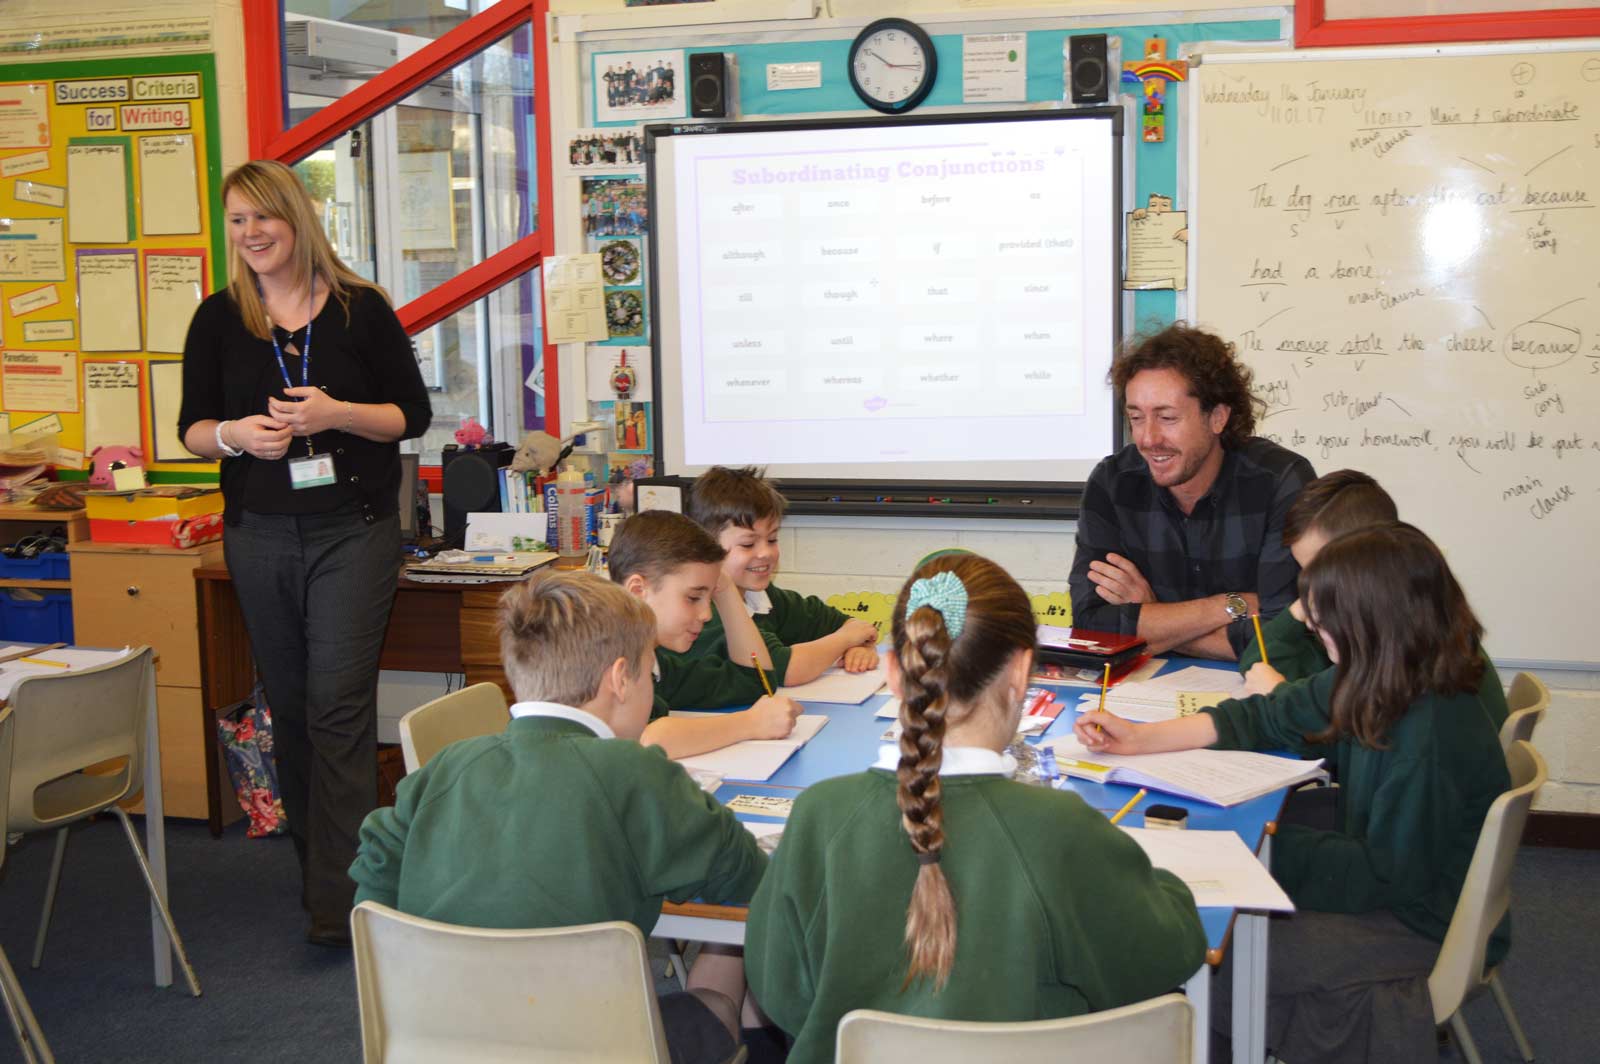 Cricketer Ryan Sidebottom visited pupils at Fountains CE Primary School